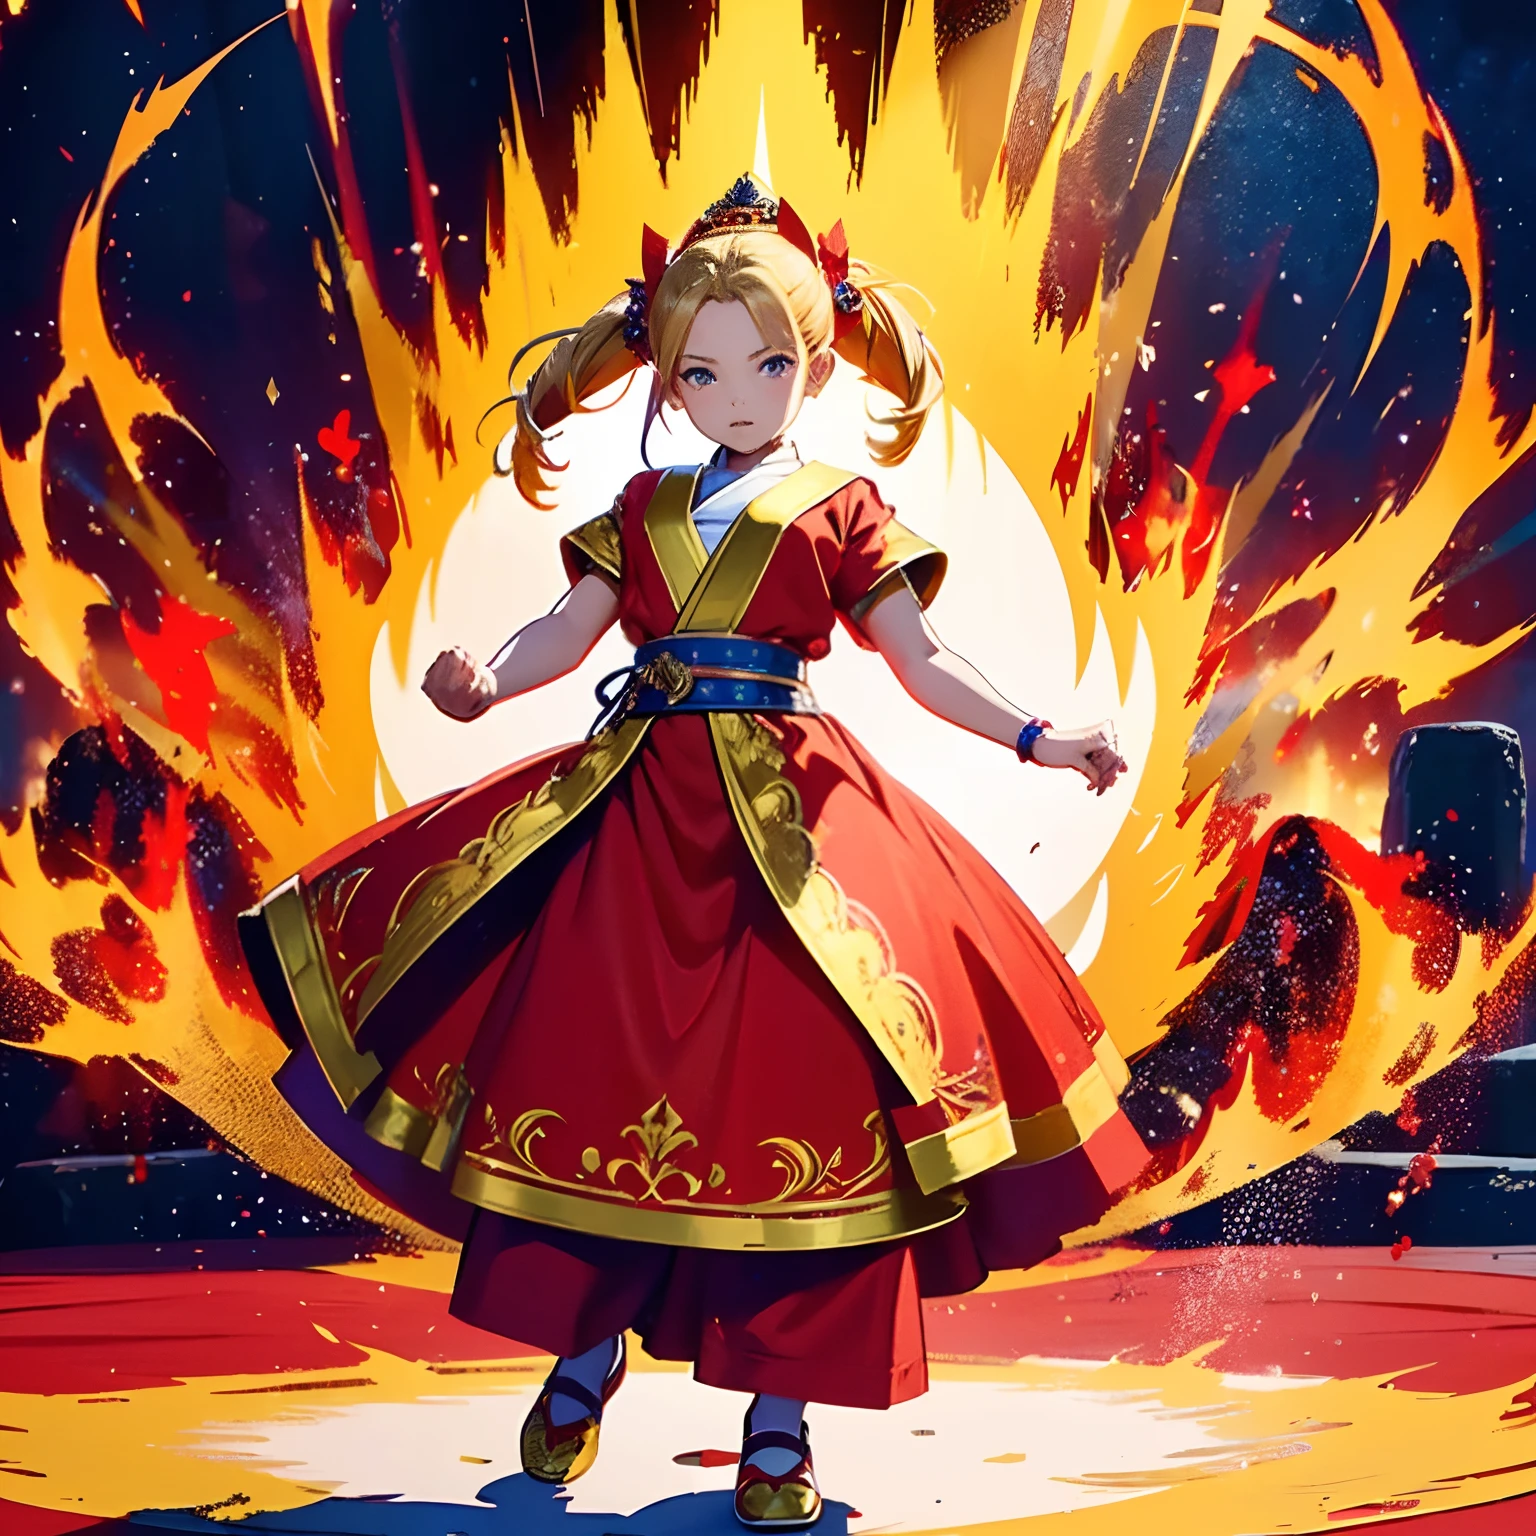 (best quality,ultra-detailed,realistic),red and gold,castle,7-year-old girl with beautiful detailed red color eyes and lips, flowing yellow blond hair, flat chest, no breasts, wearing a red and gold monk gi, charging ki. The scene is set in a castle with a fancy carpet, adorned with vibrant colors. The artwork is photo-realistic with vivid colors, capturing the energy and vibrancy of the girl's charging ki, wearing cloth shoes, hands are closed fists, glowing silver aura,